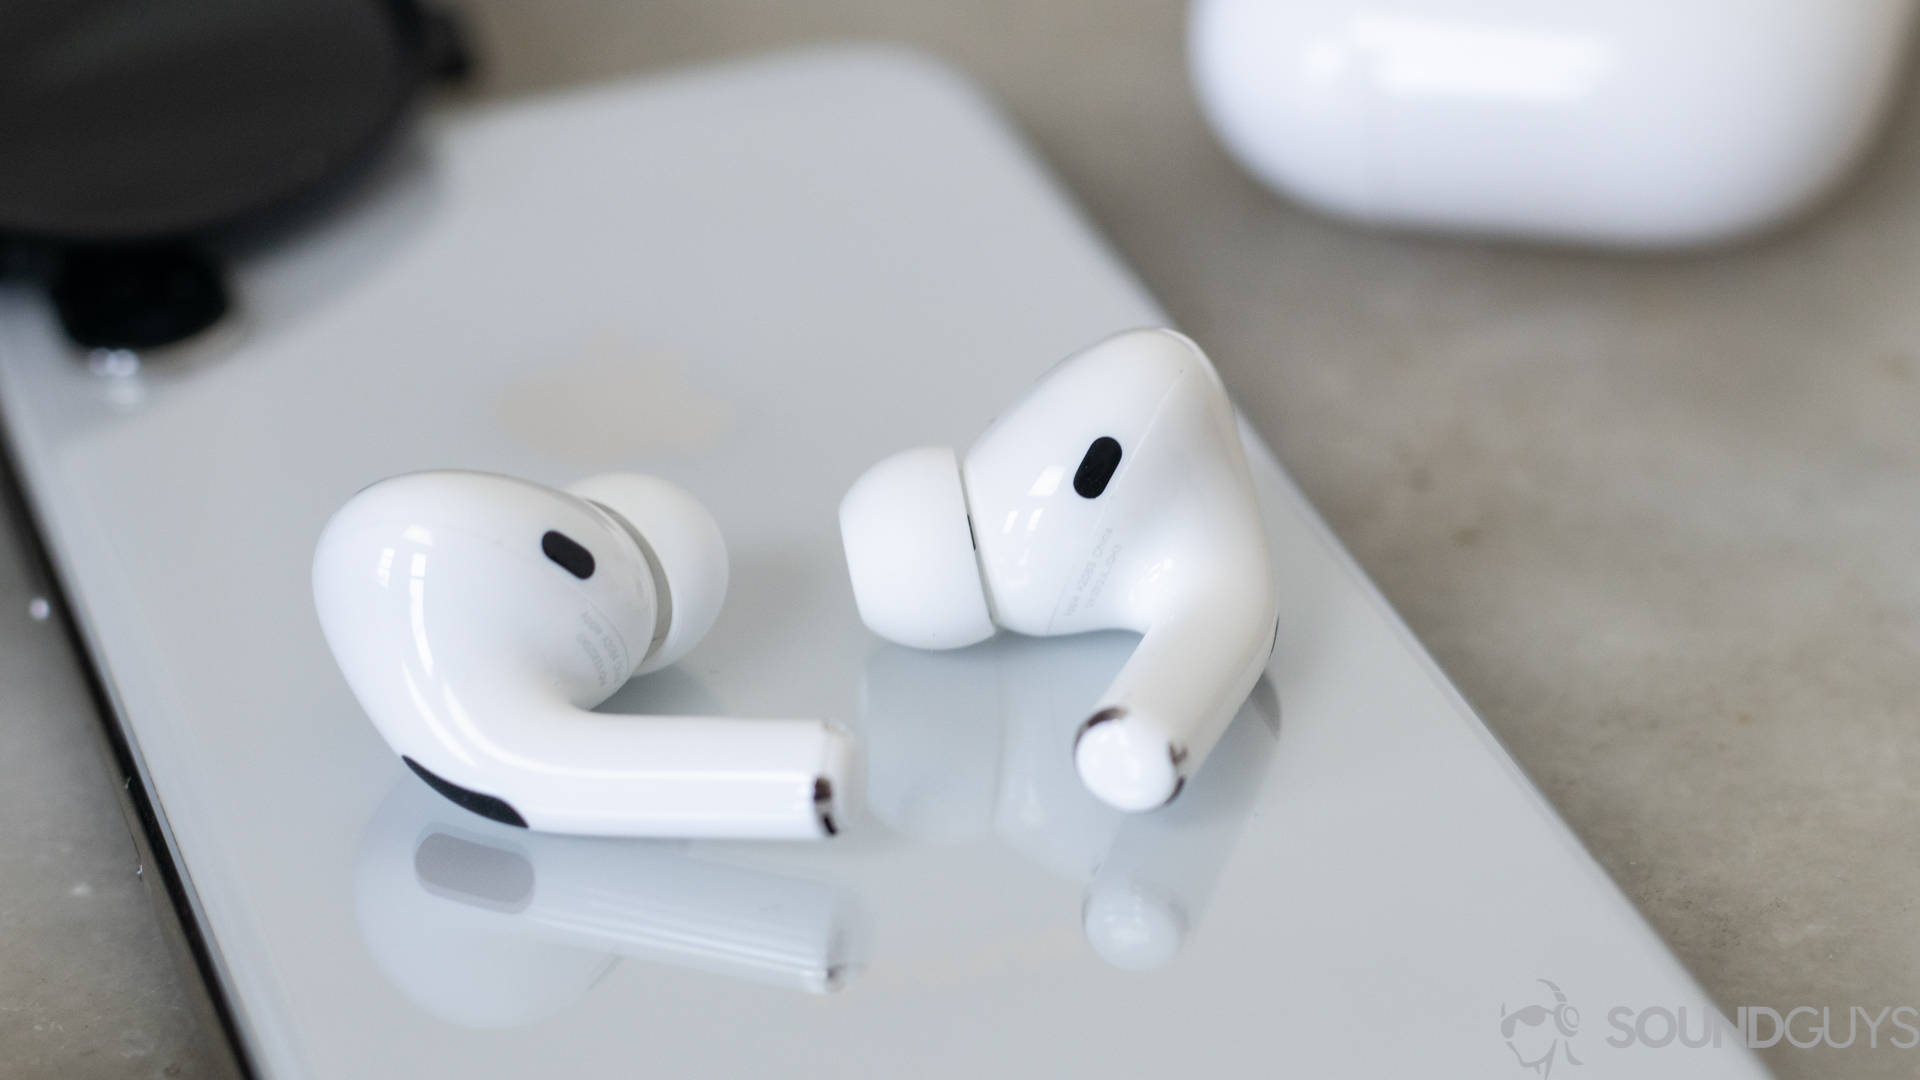 The Apple AirPods Pro noise canceling true wireless earbuds rest on a smartphone.